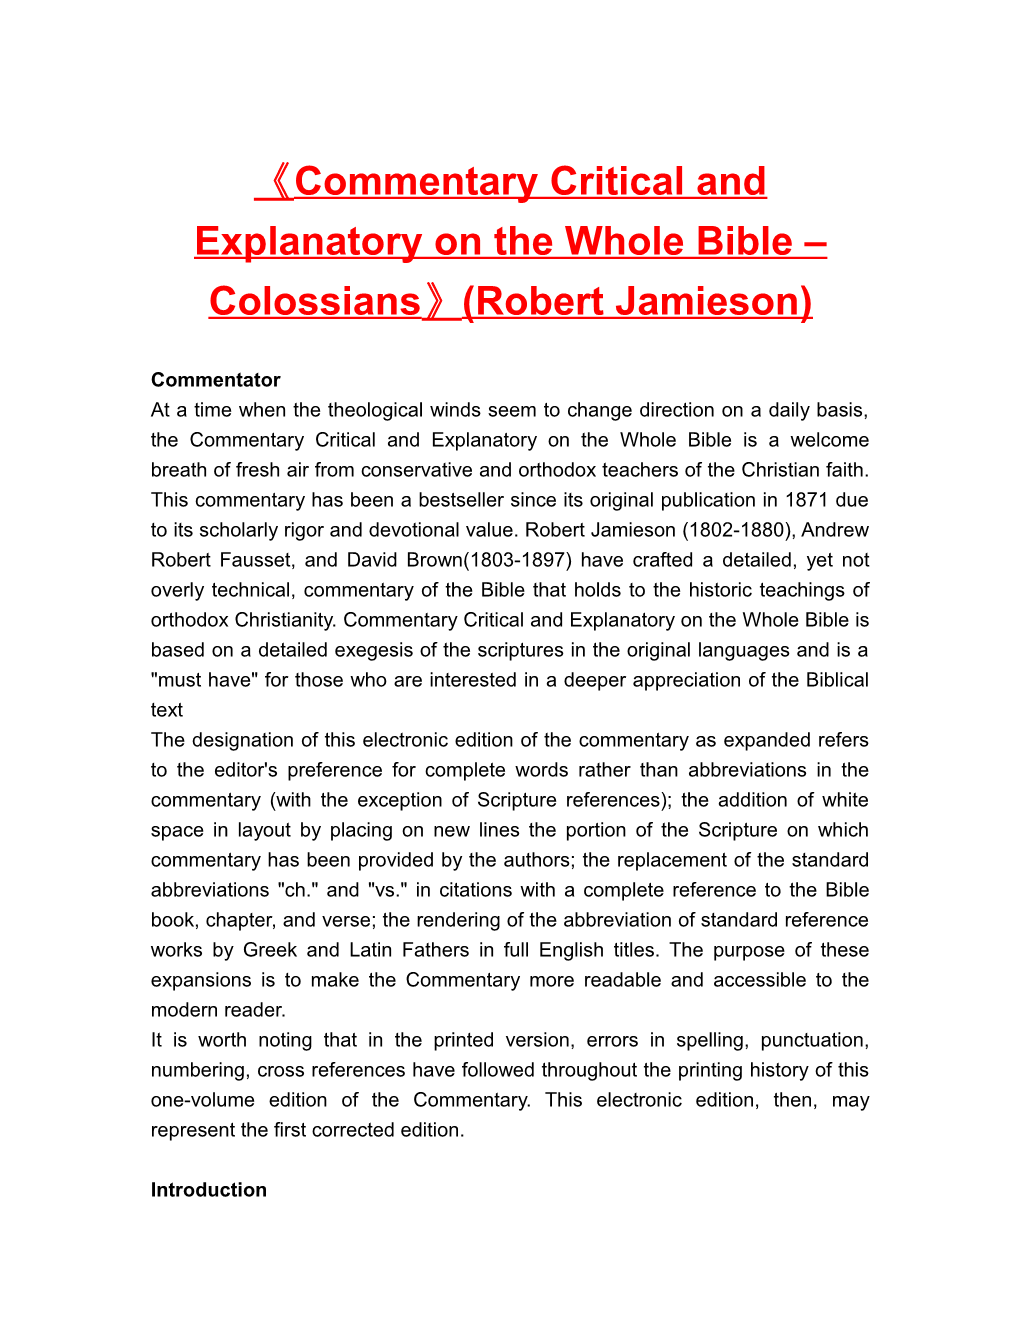 Commentary Critical and Explanatory on the Whole Bible Colossians (Robert Jamieson)